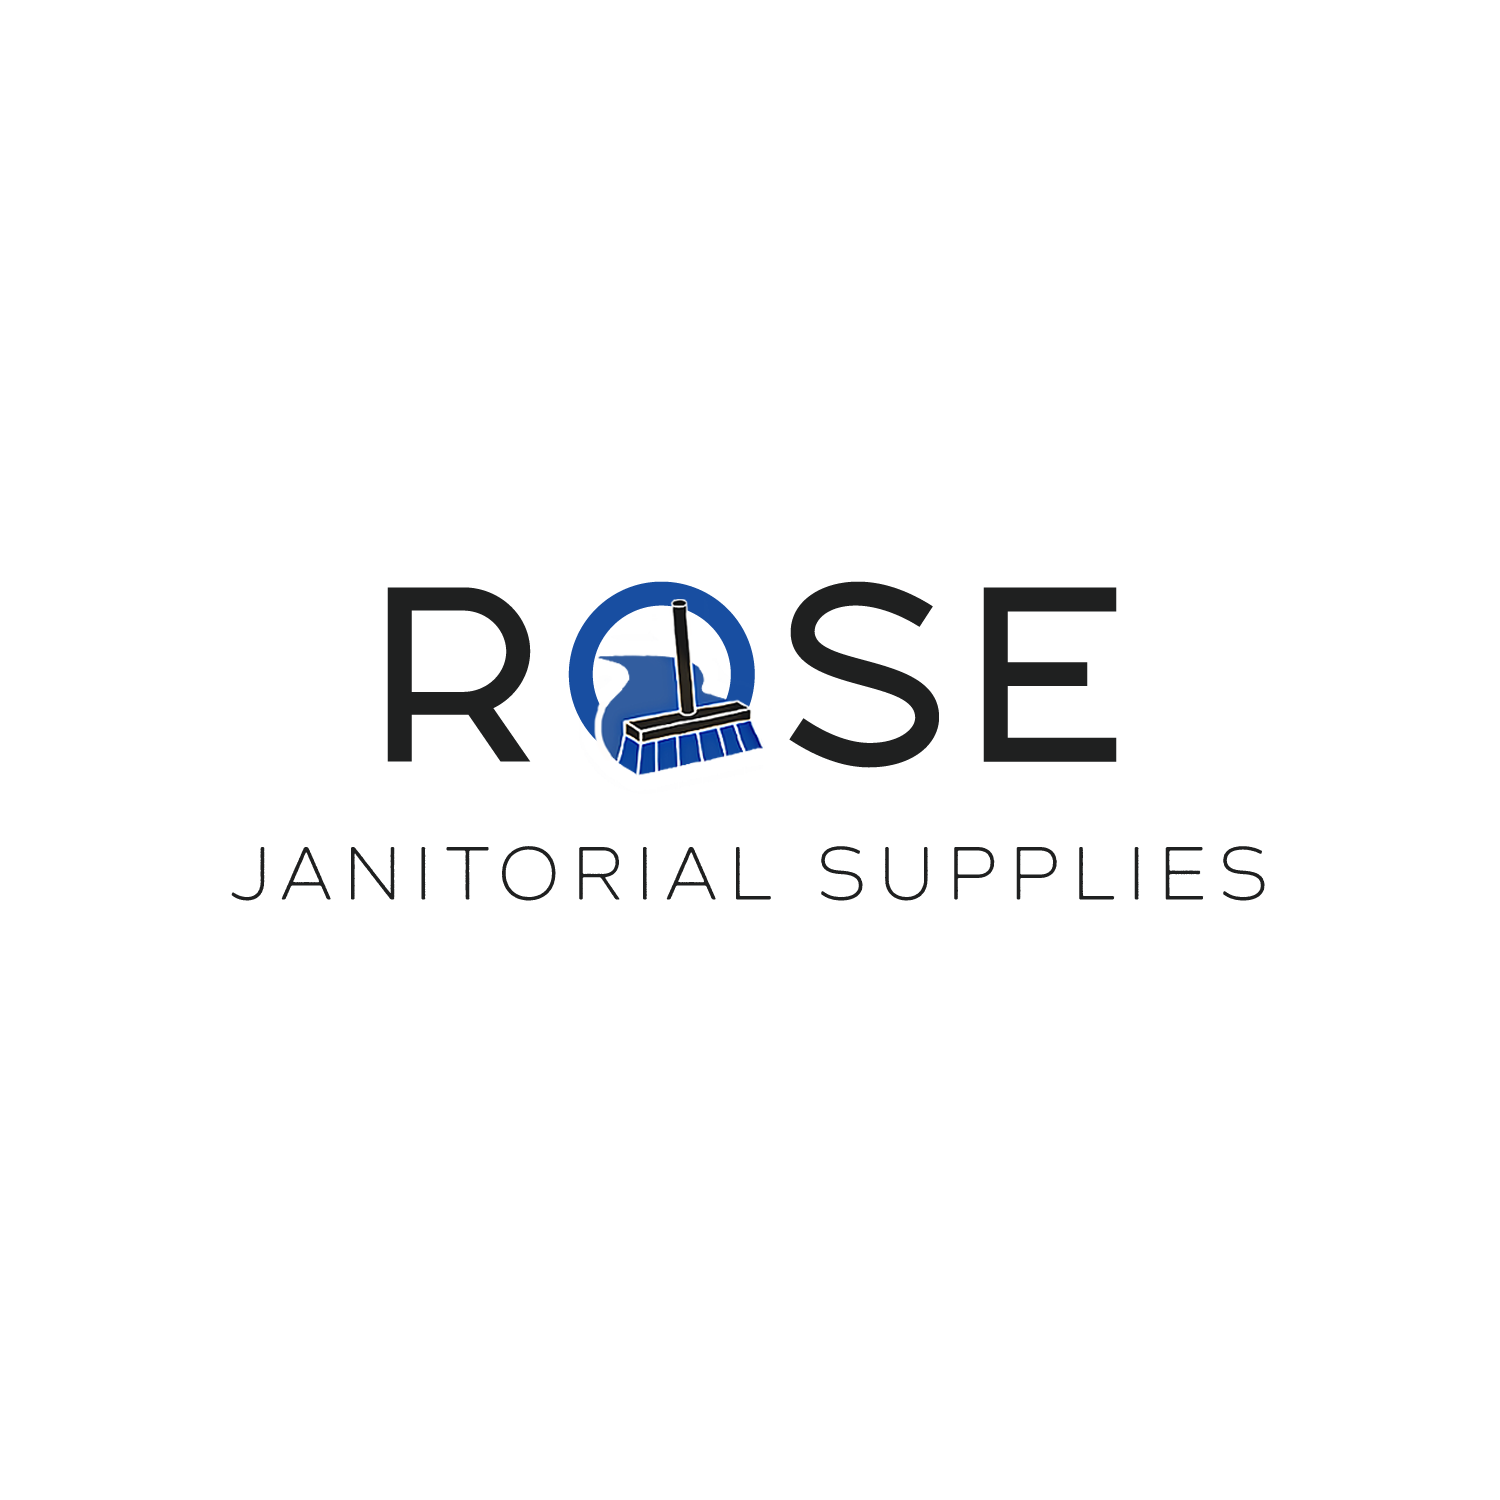 Rose Janitorial Supply